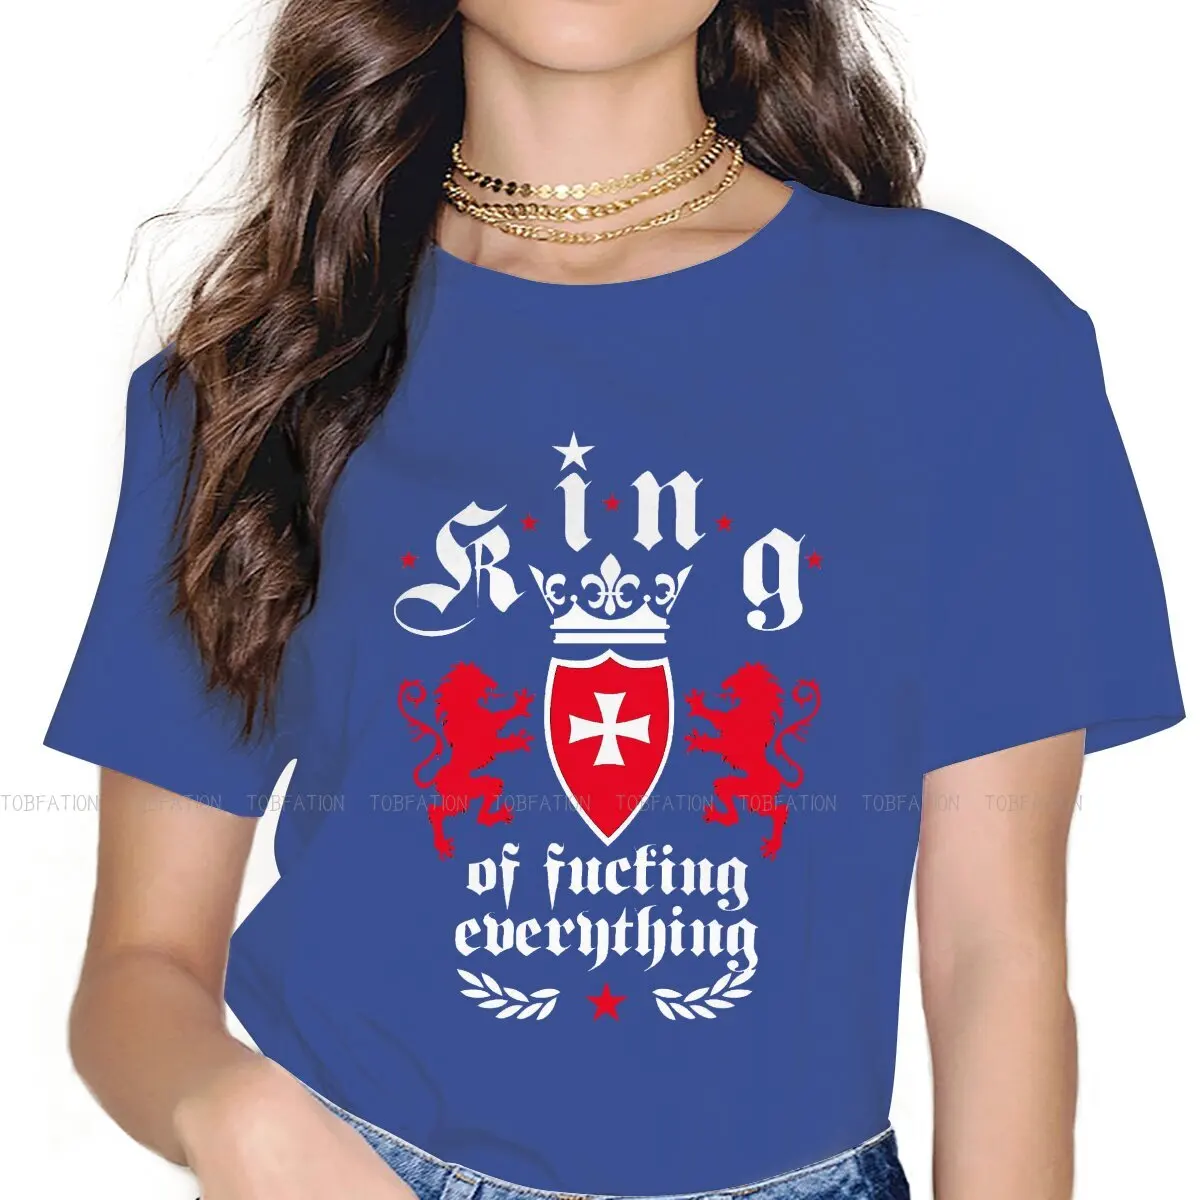 

Everything King Crown Lions Hipster TShirts Crusader Kings Middle Ages in Europe Game Female Graphic Pure T Shirt Round Neck